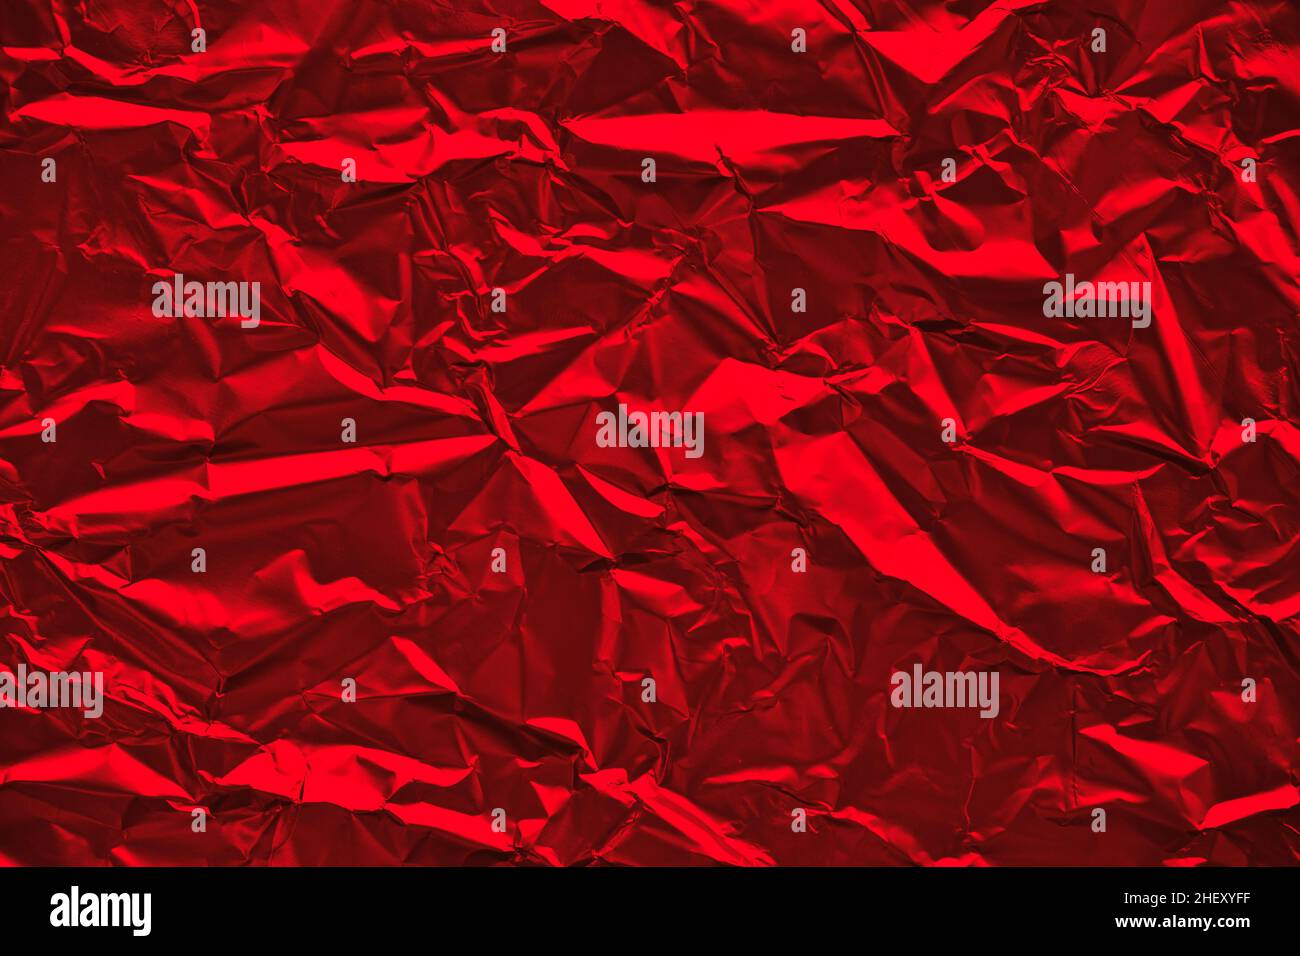 https://c8.alamy.com/comp/2HEXYFF/close-up-of-crumpled-silver-aluminum-foil-texture-in-red-tone-abstract-background-for-design-2HEXYFF.jpg